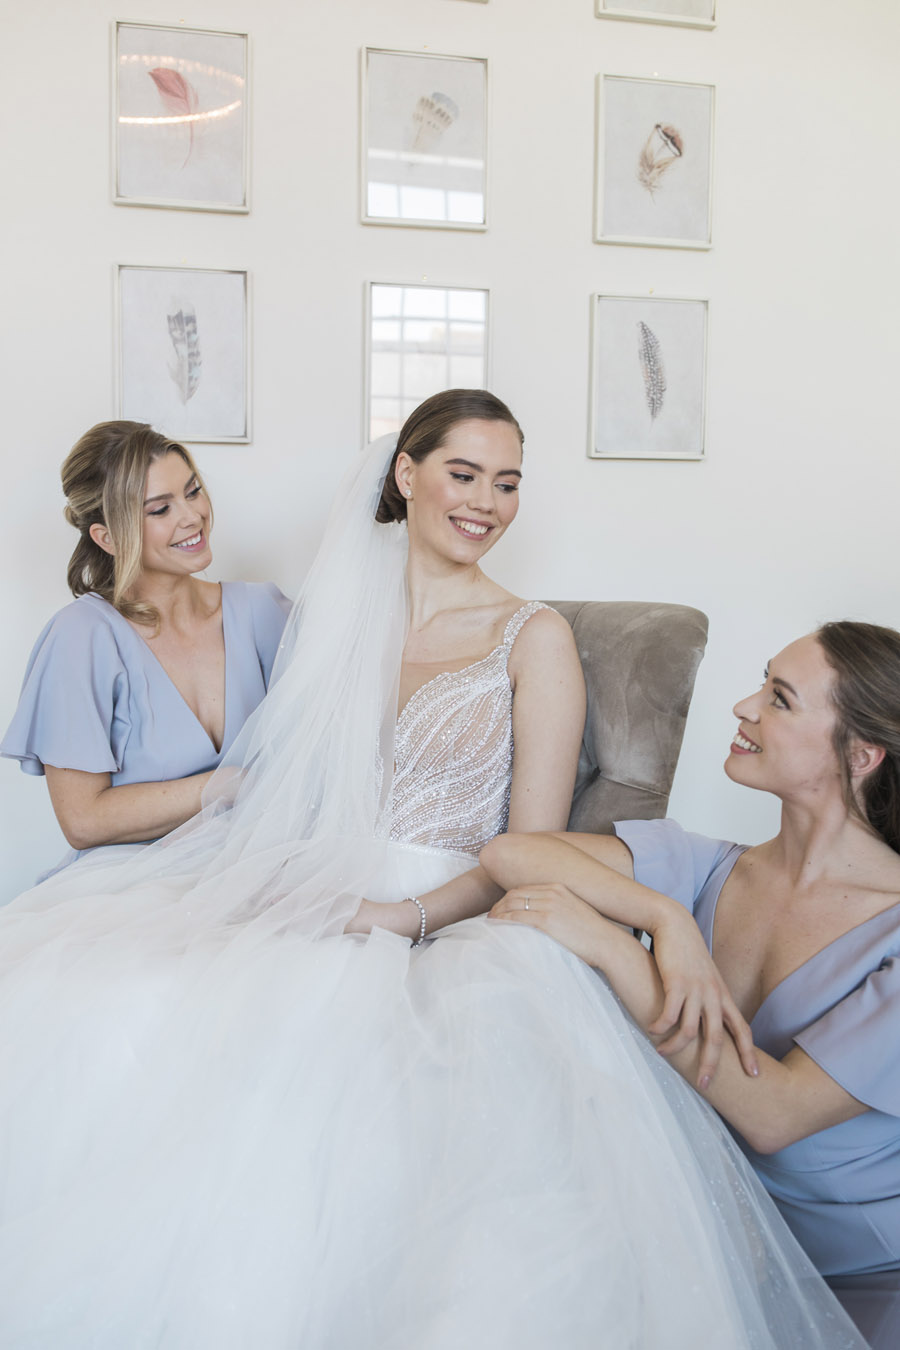 for bridesmaids everywhere, with love. Image credit Natalie D Photography (26)